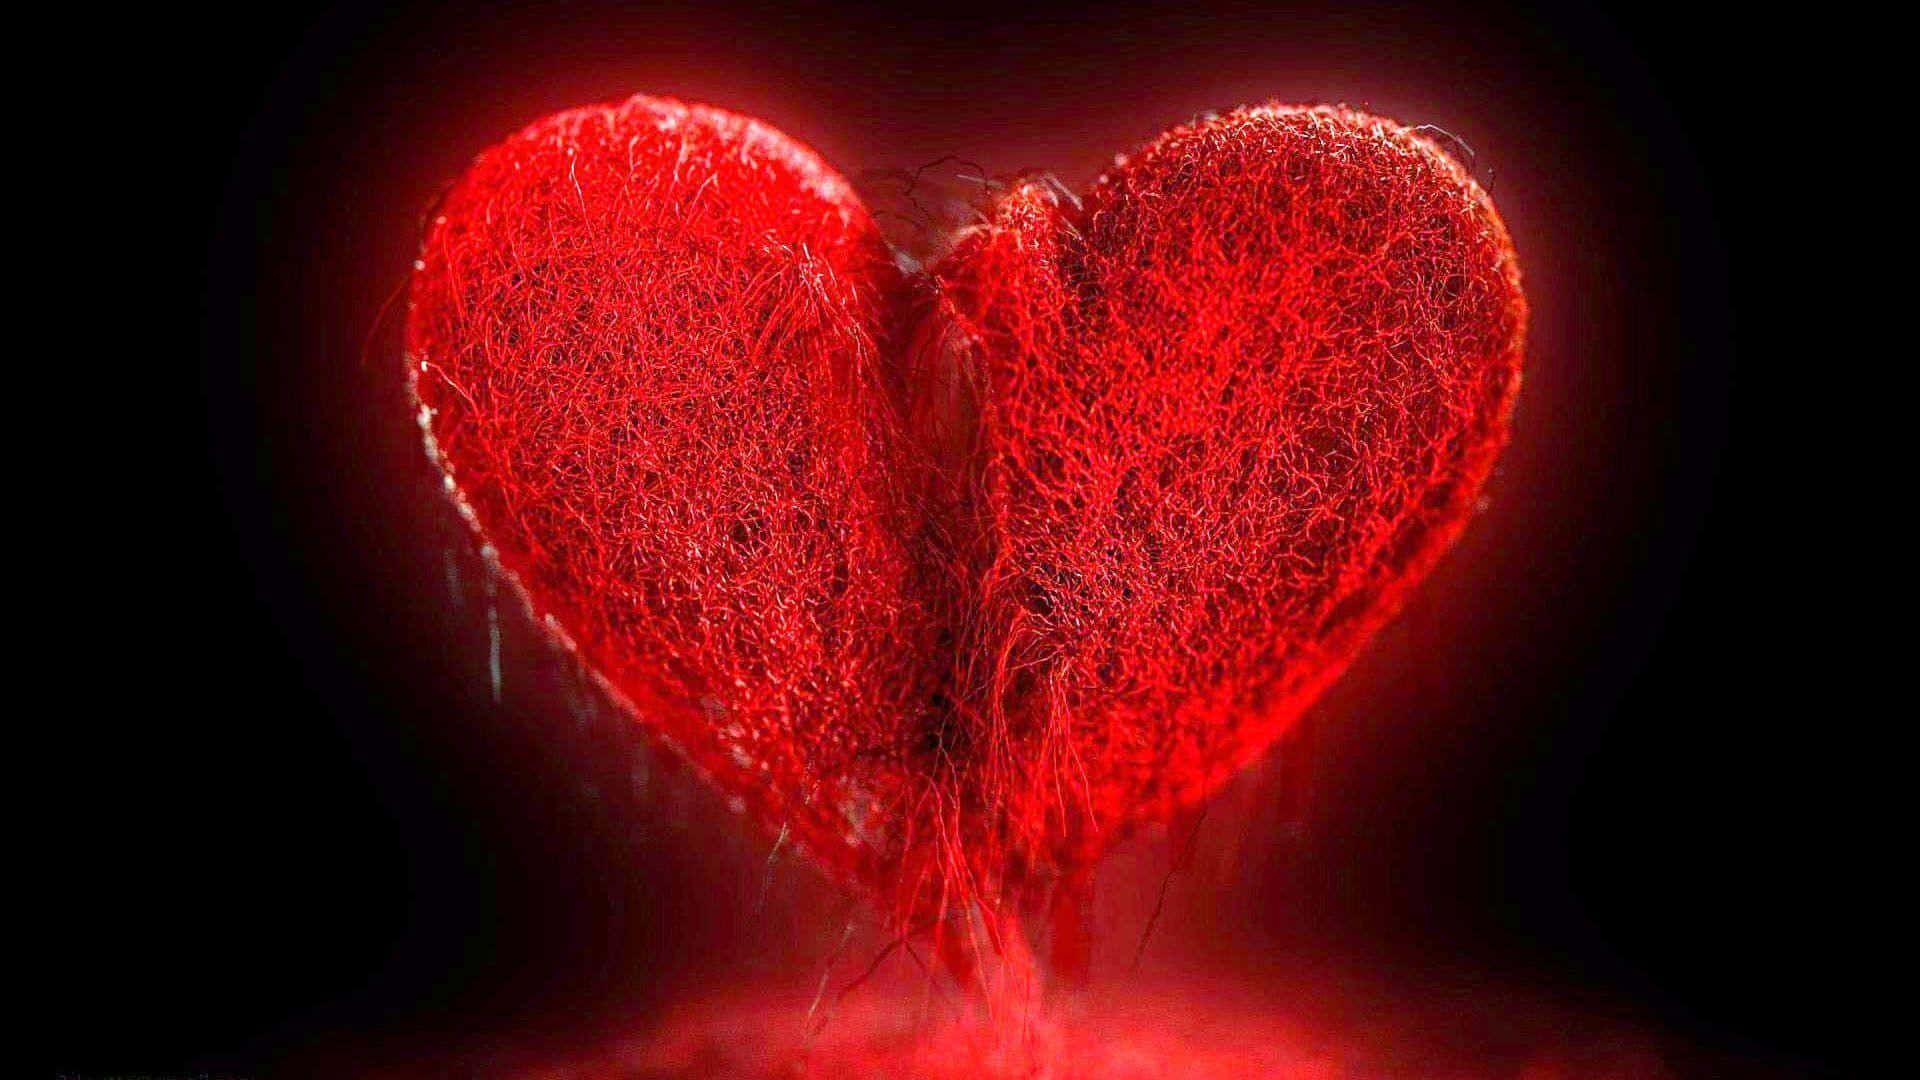 A Red Heart With A Black Background